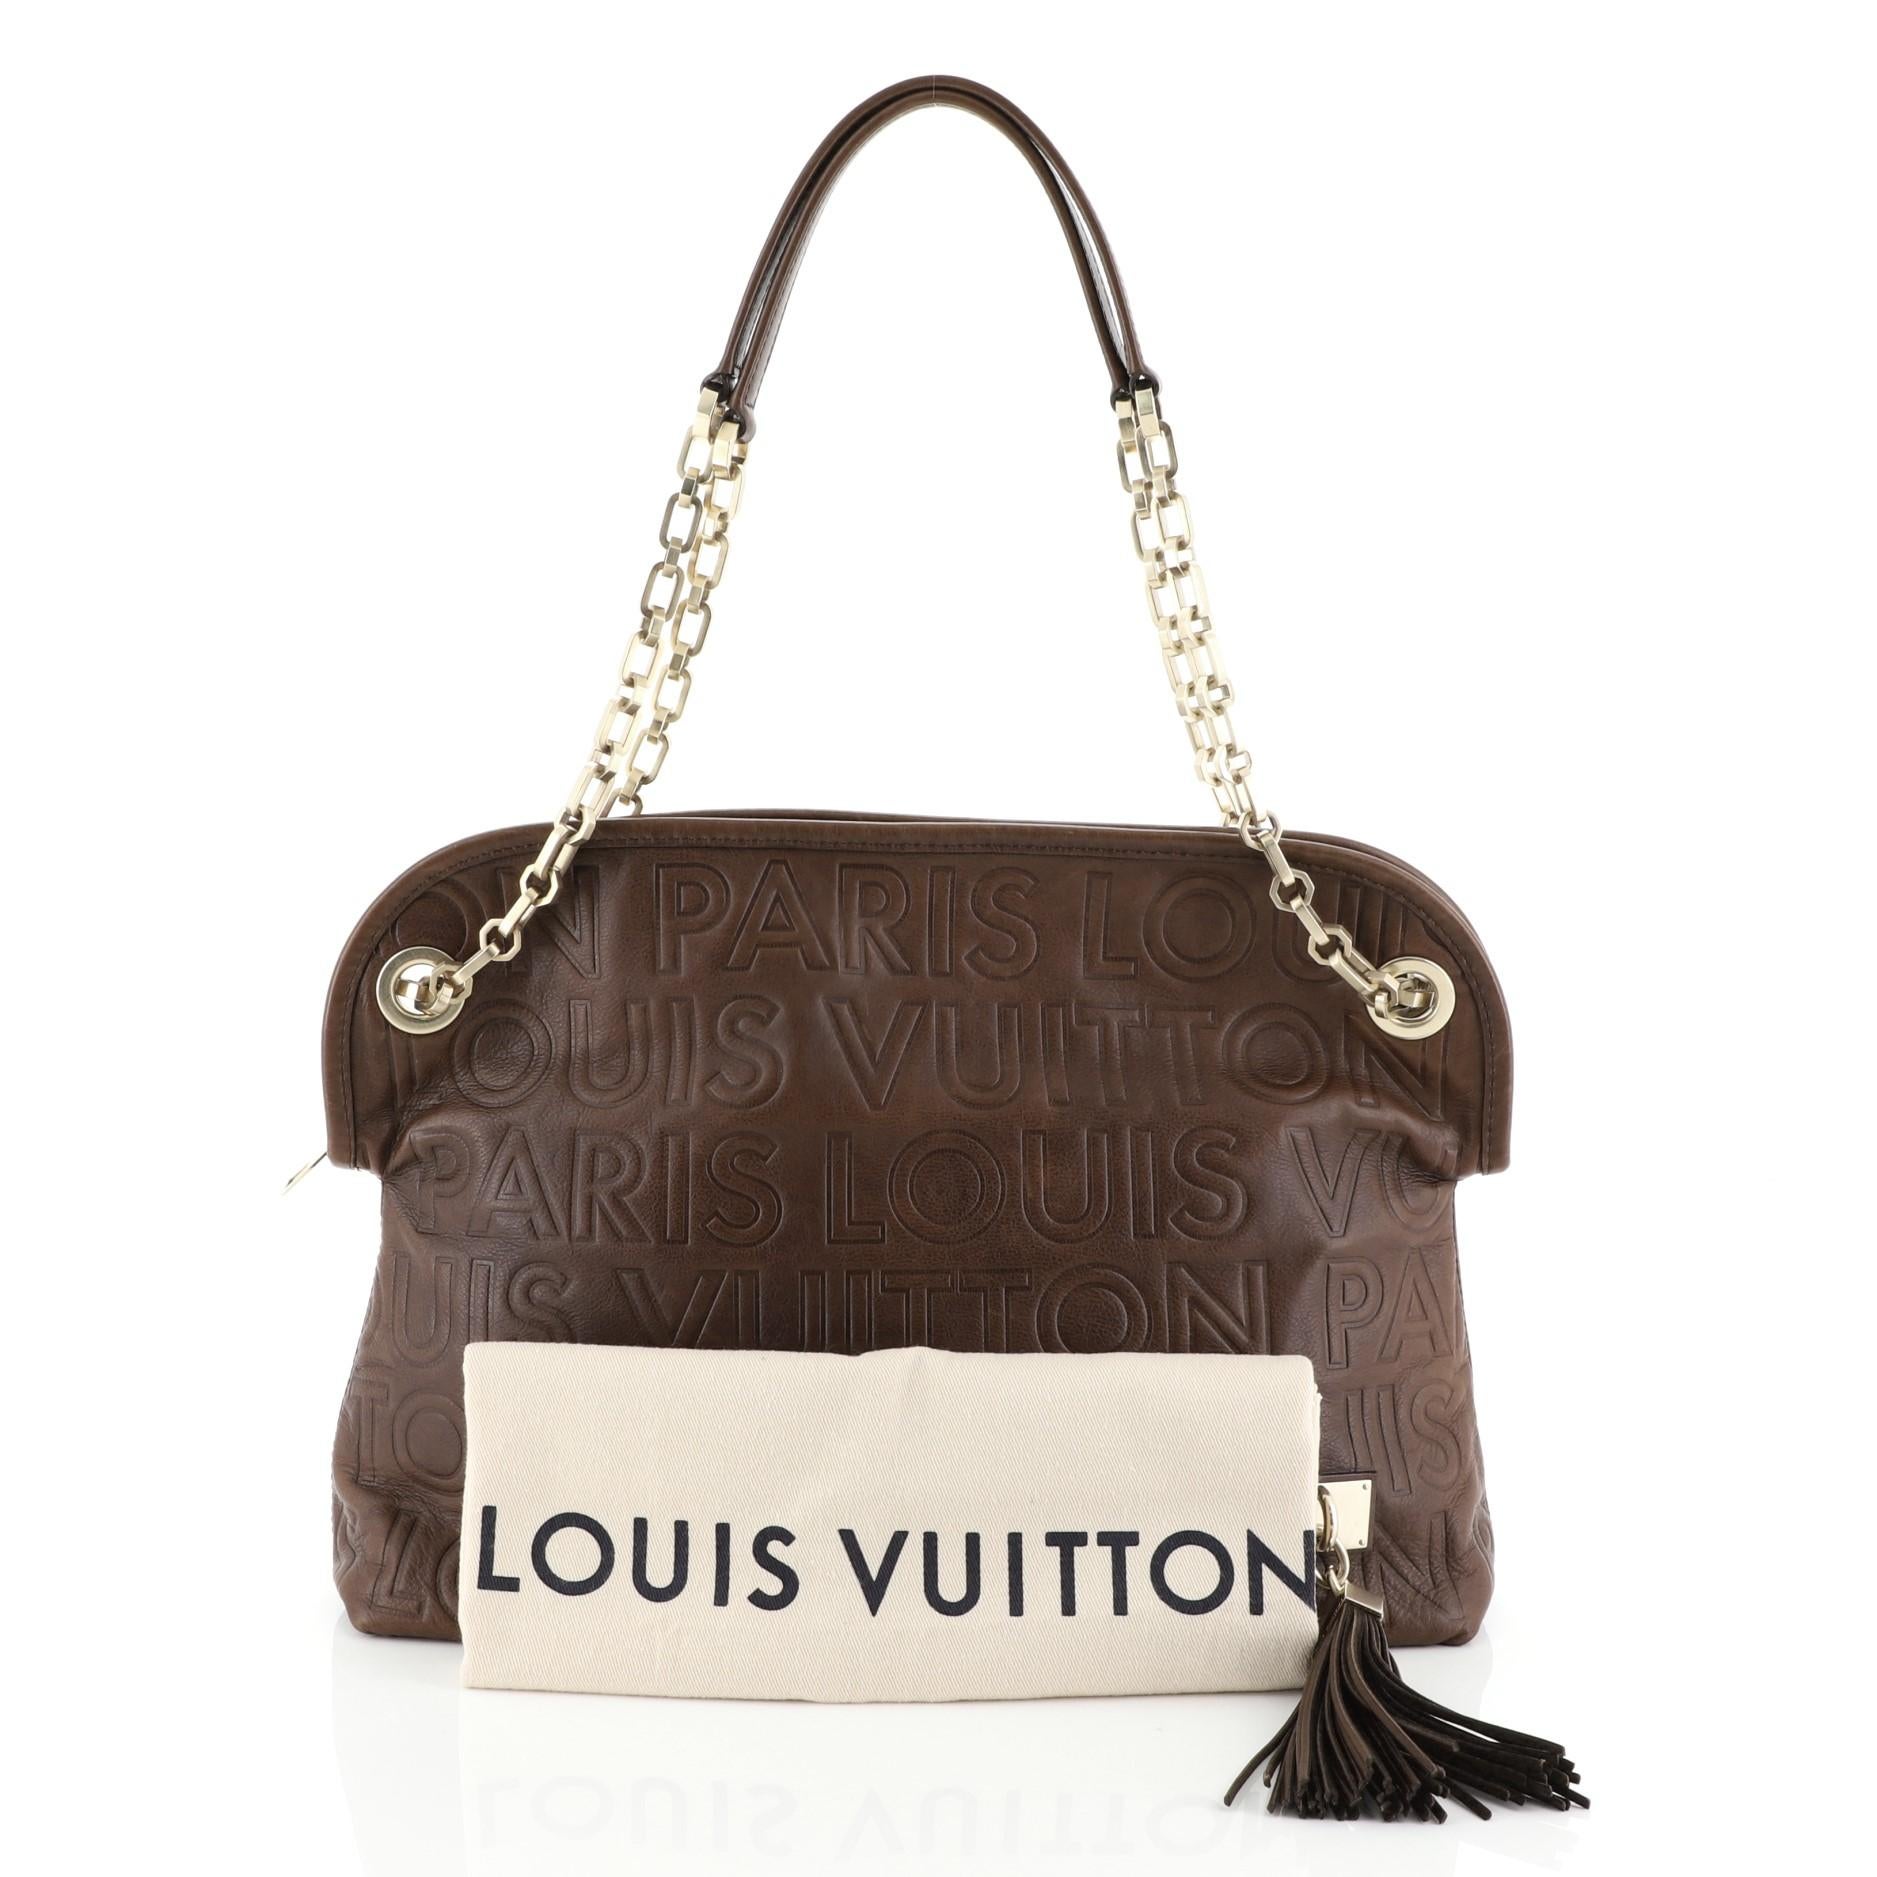 This Louis Vuitton Paris Souple Wish Bag Leather, crafted from brown leather, features dual leather handles with chain links, embossed Louis Vuitton logo throughout, leather tassel, and gold-tone hardware. Its zip closure opens to a brown microfiber